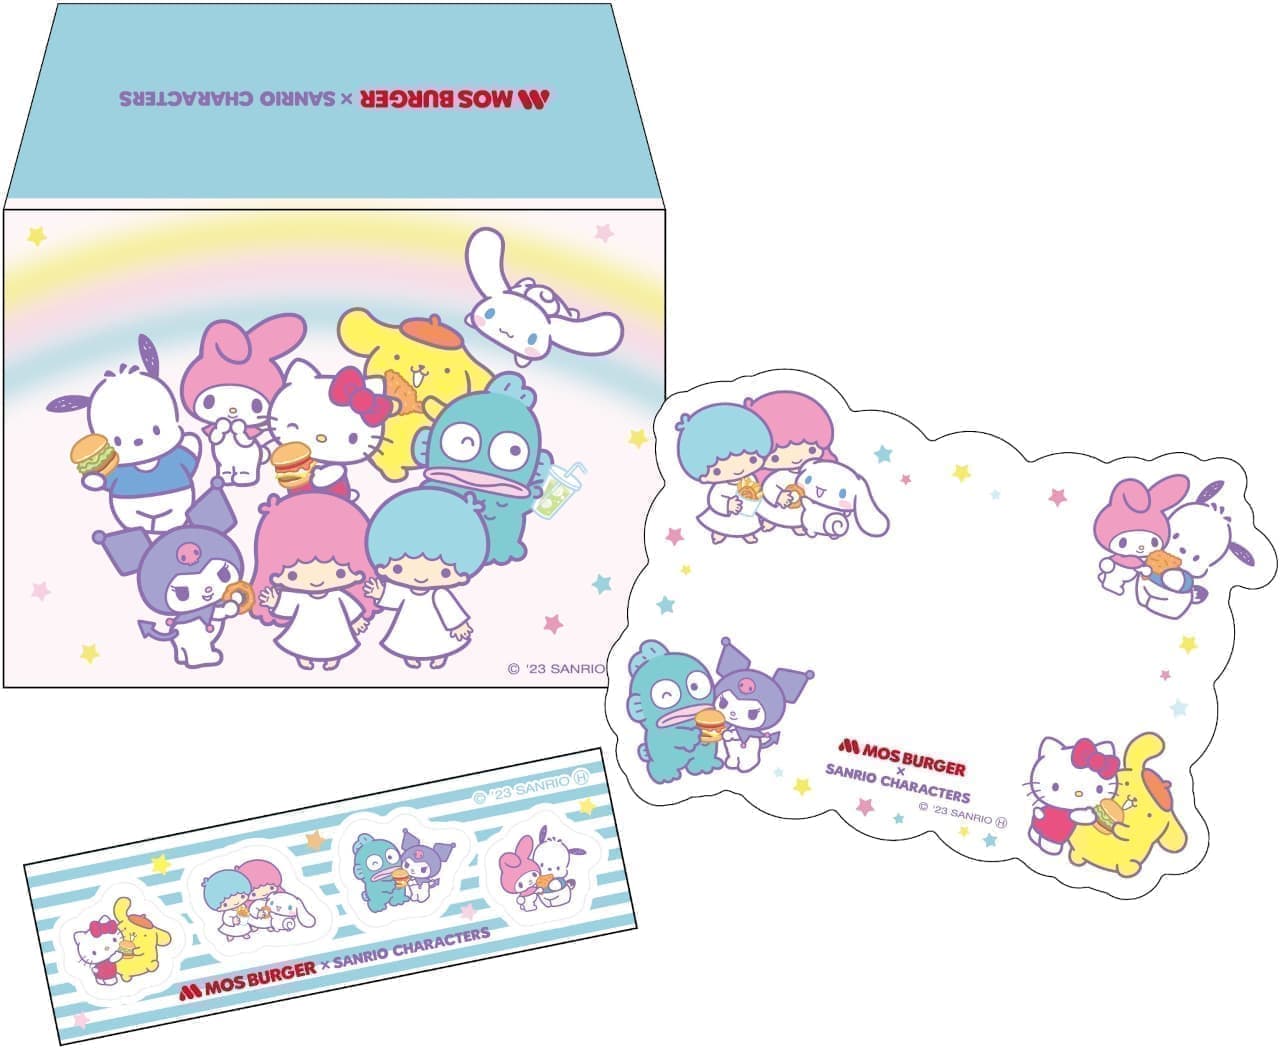 Mos Burger "Sanrio Characters" collaboration toy mini message card set